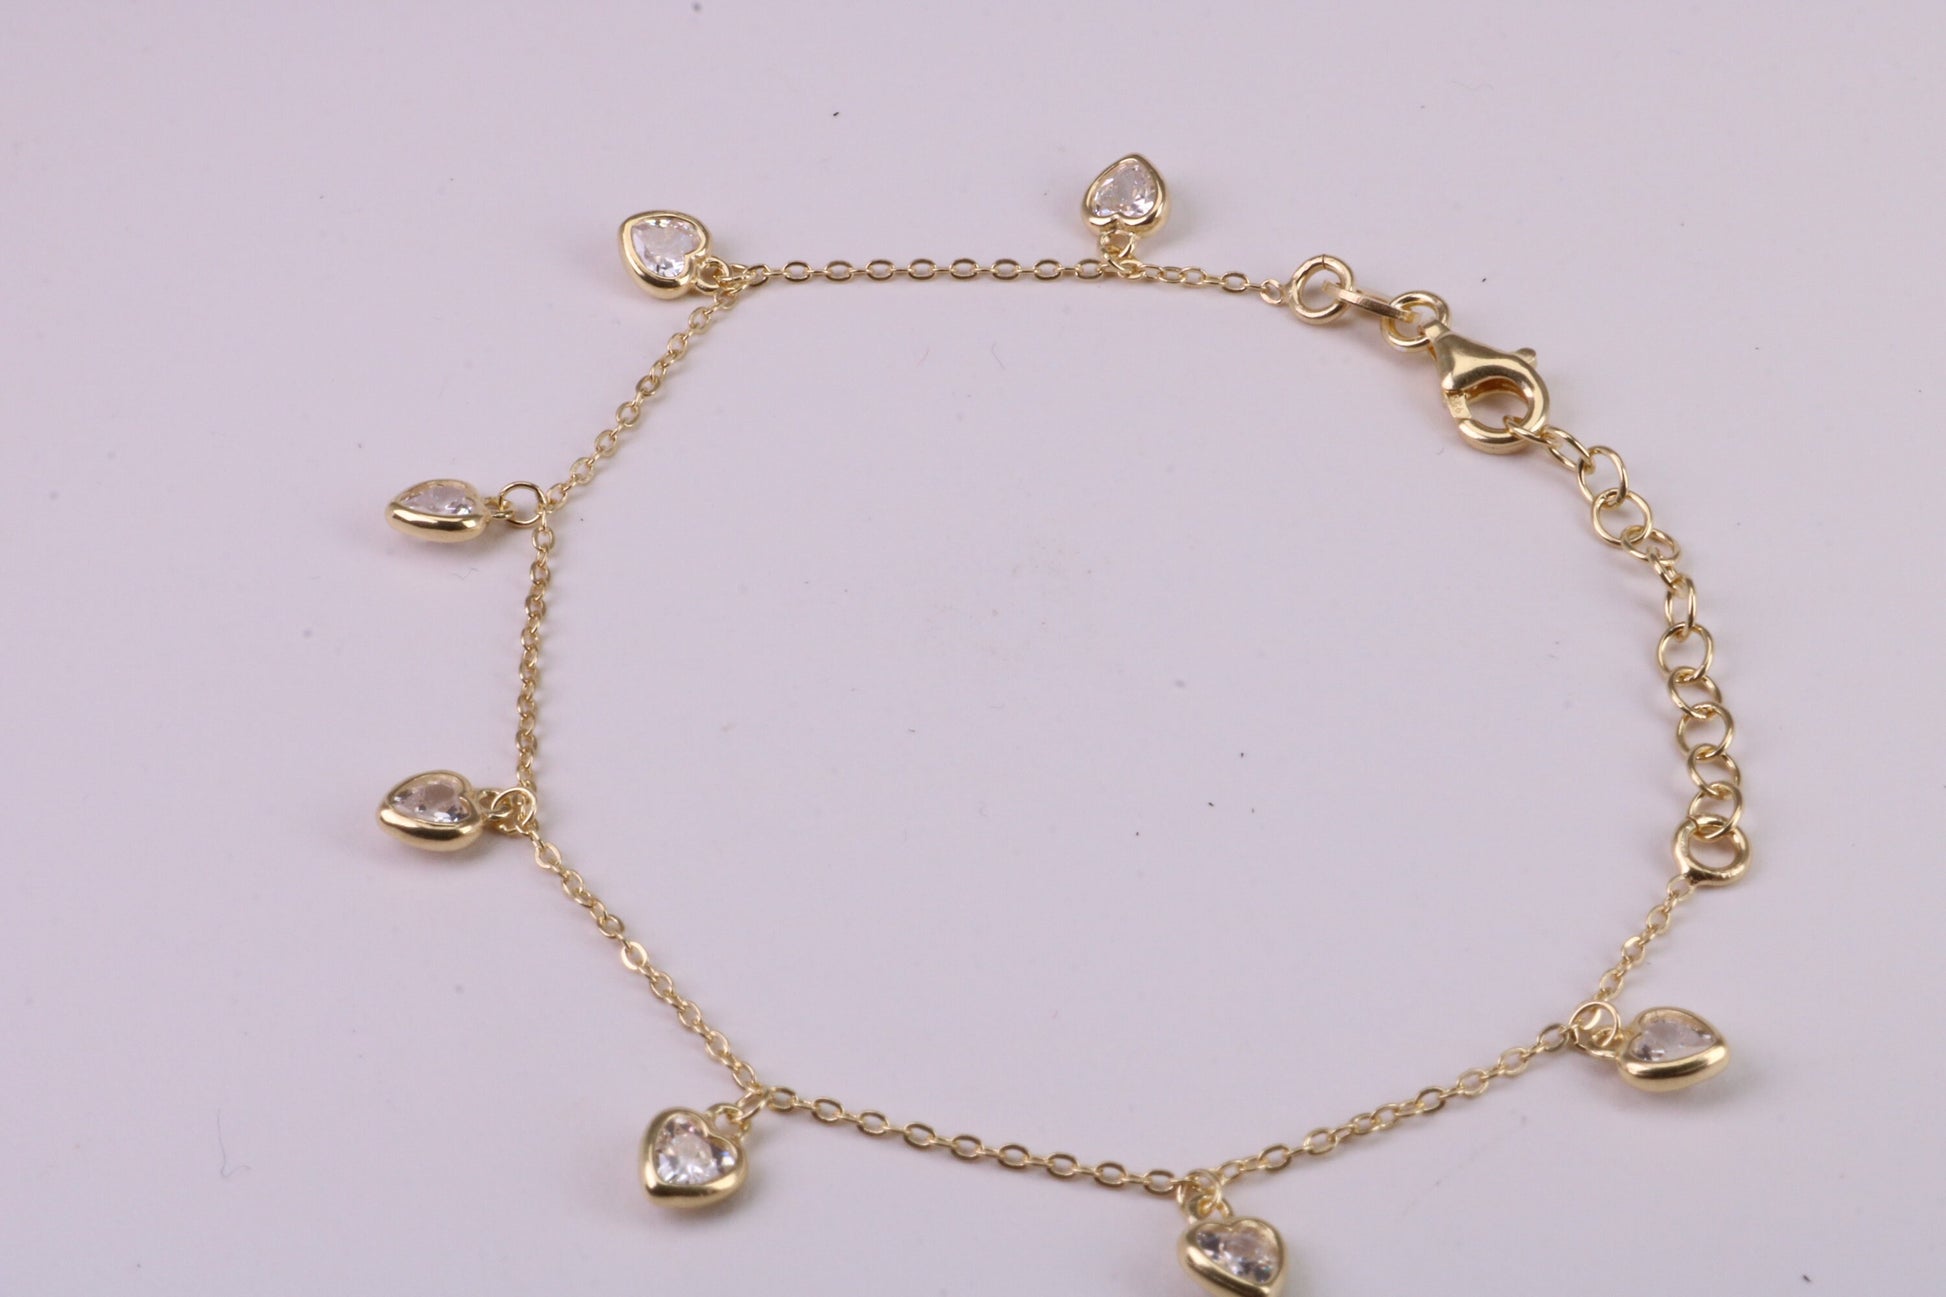 Dainty Love Hearts Bracelet, With Length Adjustable Chain, Made from solid Sterling Silver and Further 18ct Yellow Gold Plated